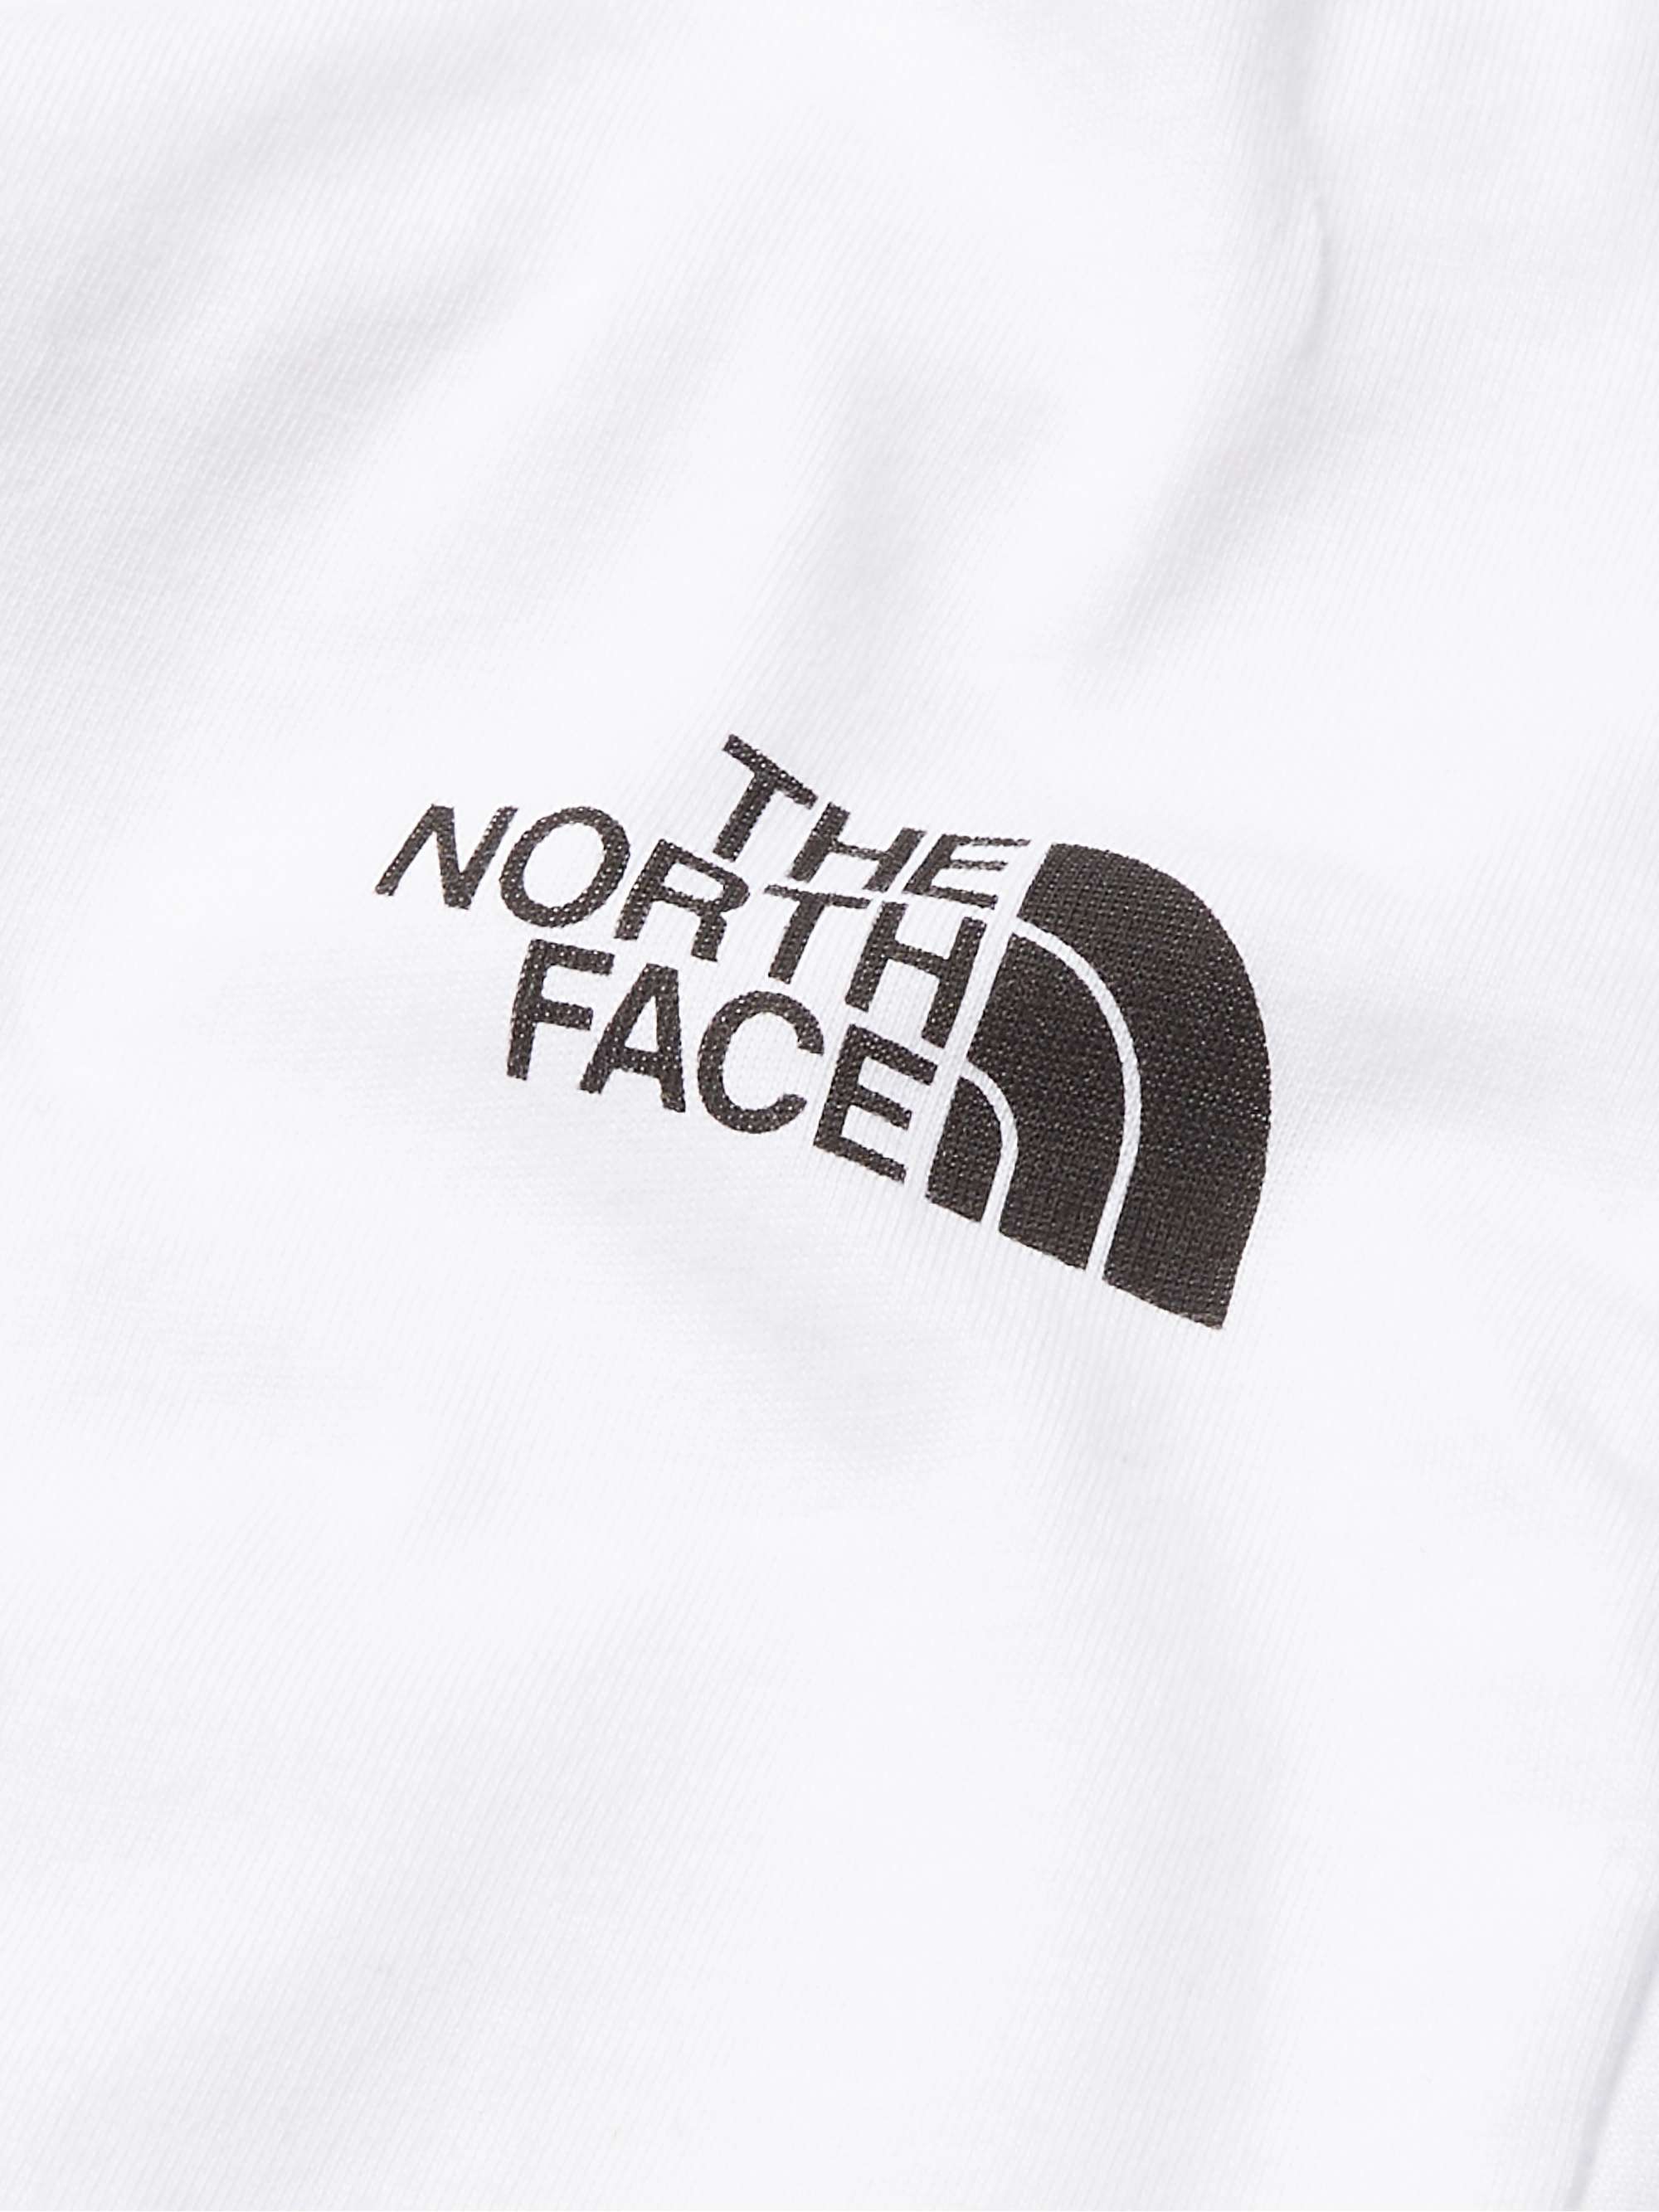 THE NORTH FACE Dome Logo-Print Cotton-Jersey T-Shirt